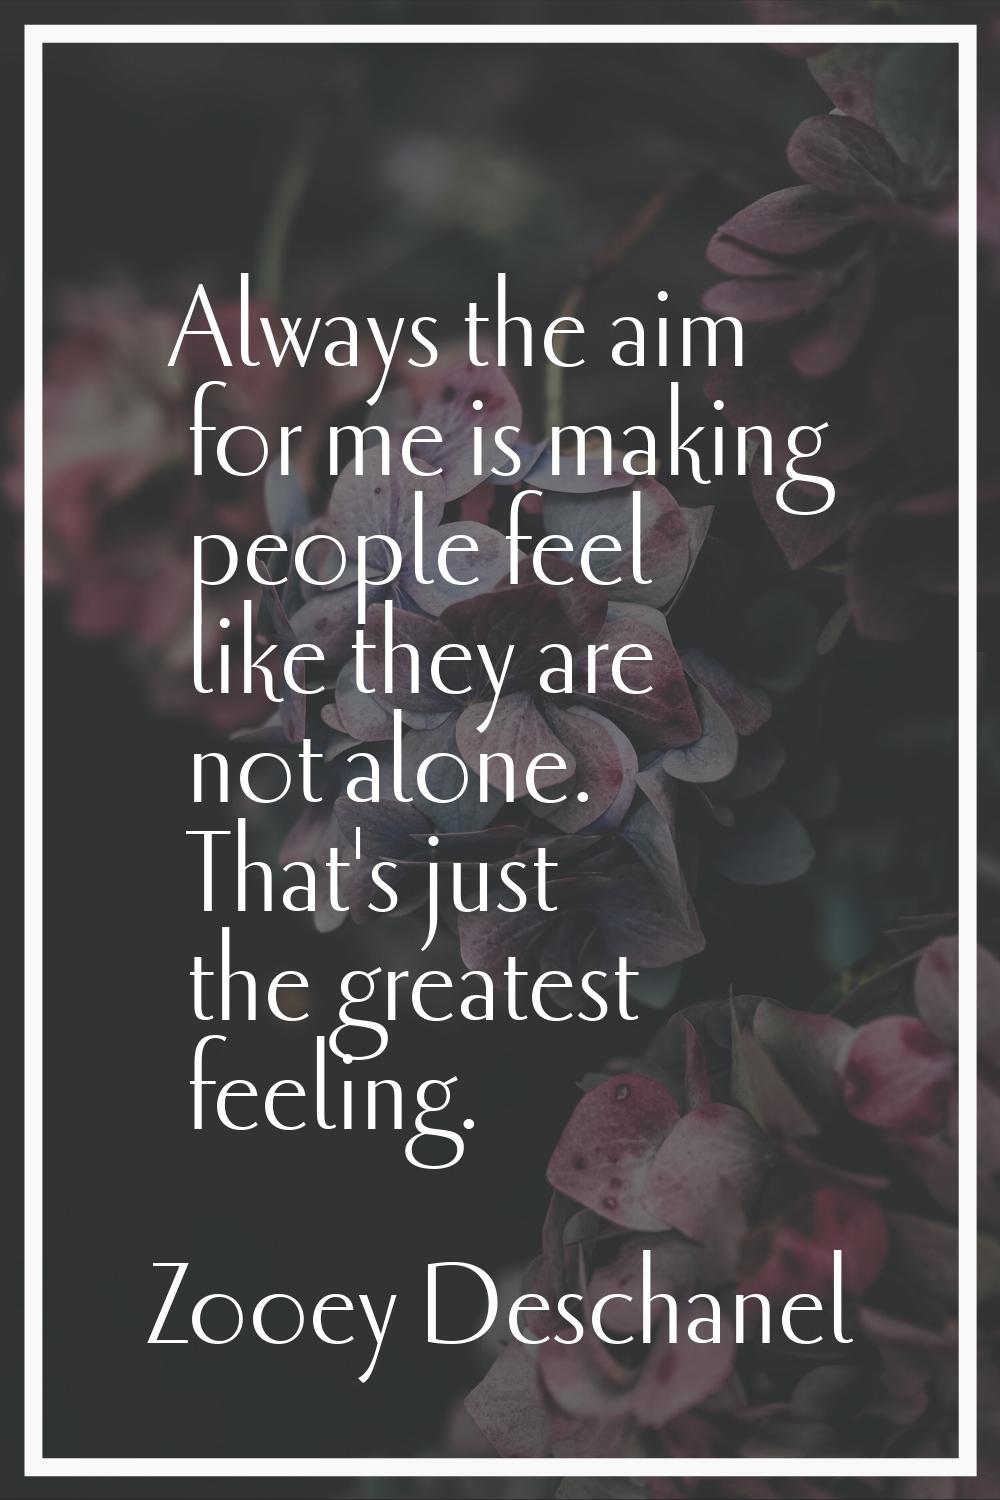 Always the aim for me is making people feel like they are not alone. That's just the greatest feeli